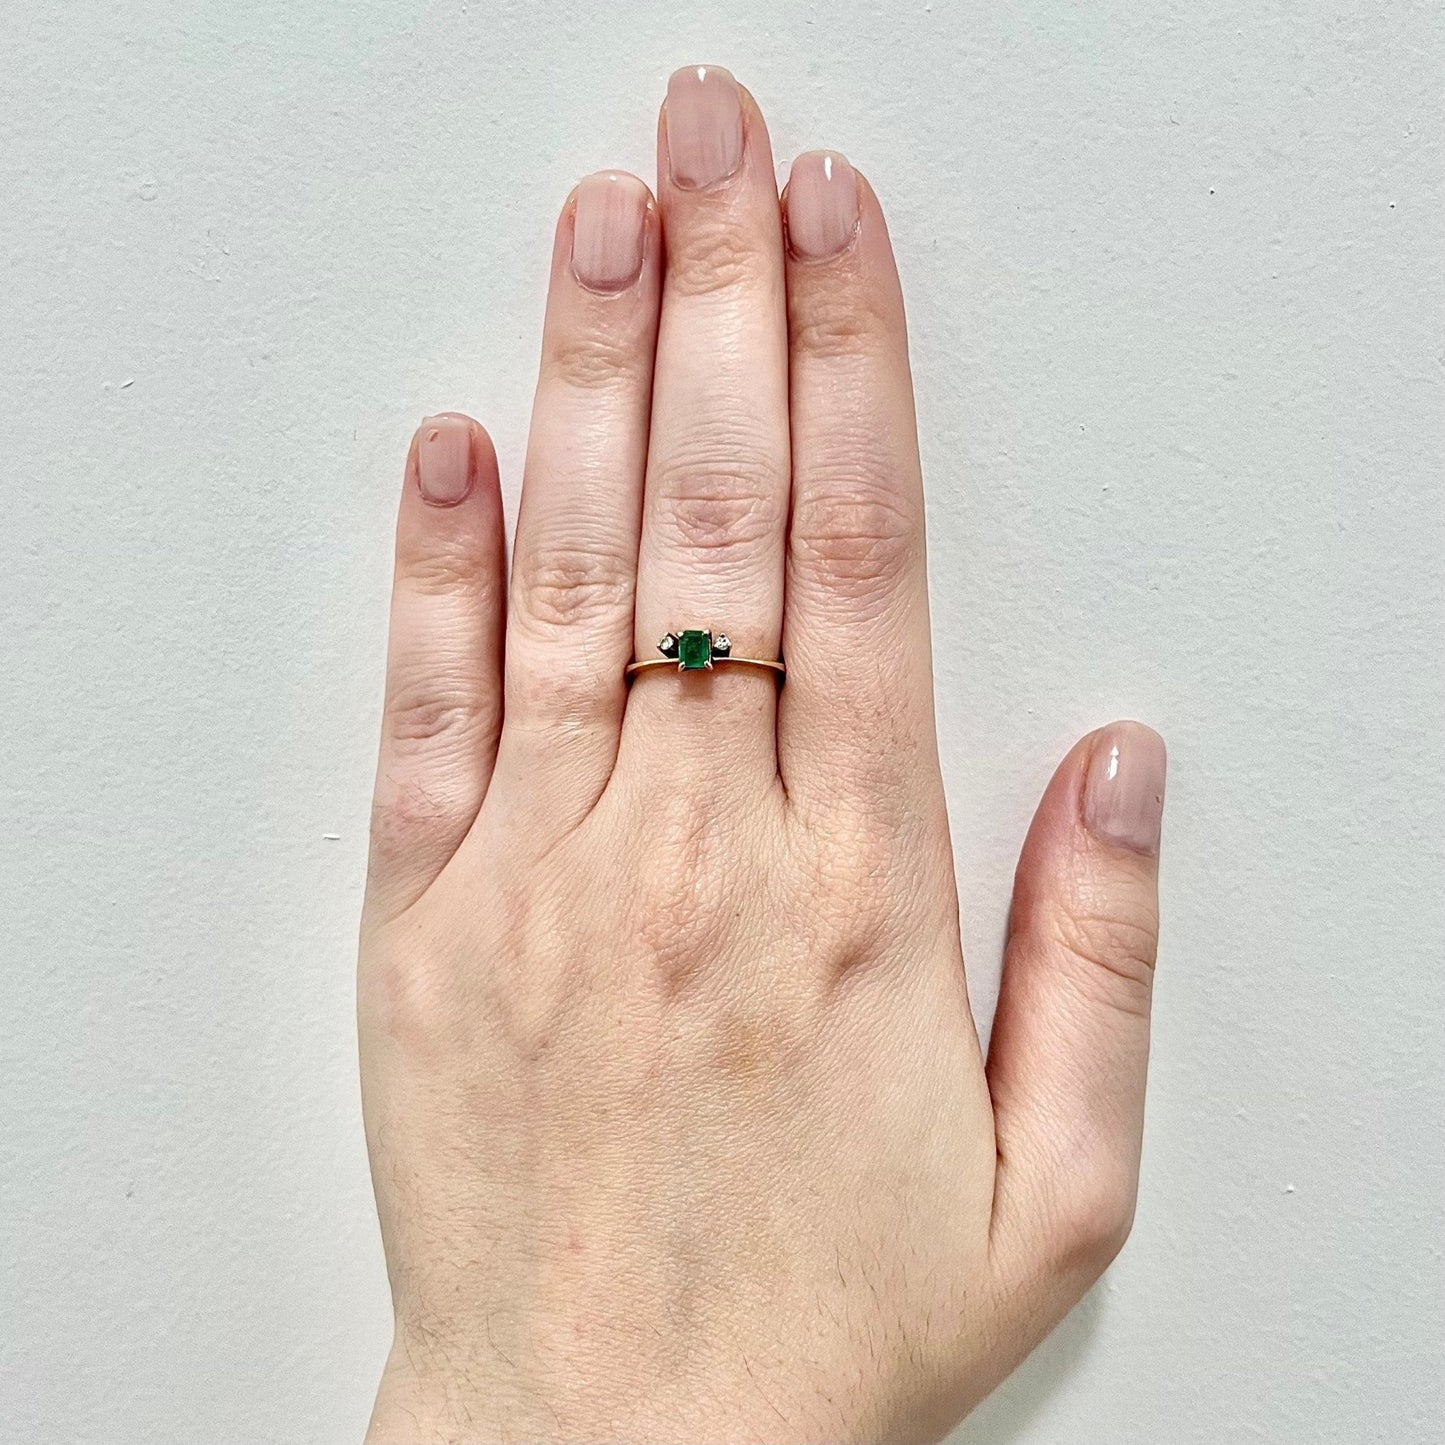 Vintage 18K Natural Emerald & Diamond Solitaire Ring - Yellow Gold Emerald Cocktail Ring - Engagement Ring - May Birthstone - Birthday Gift